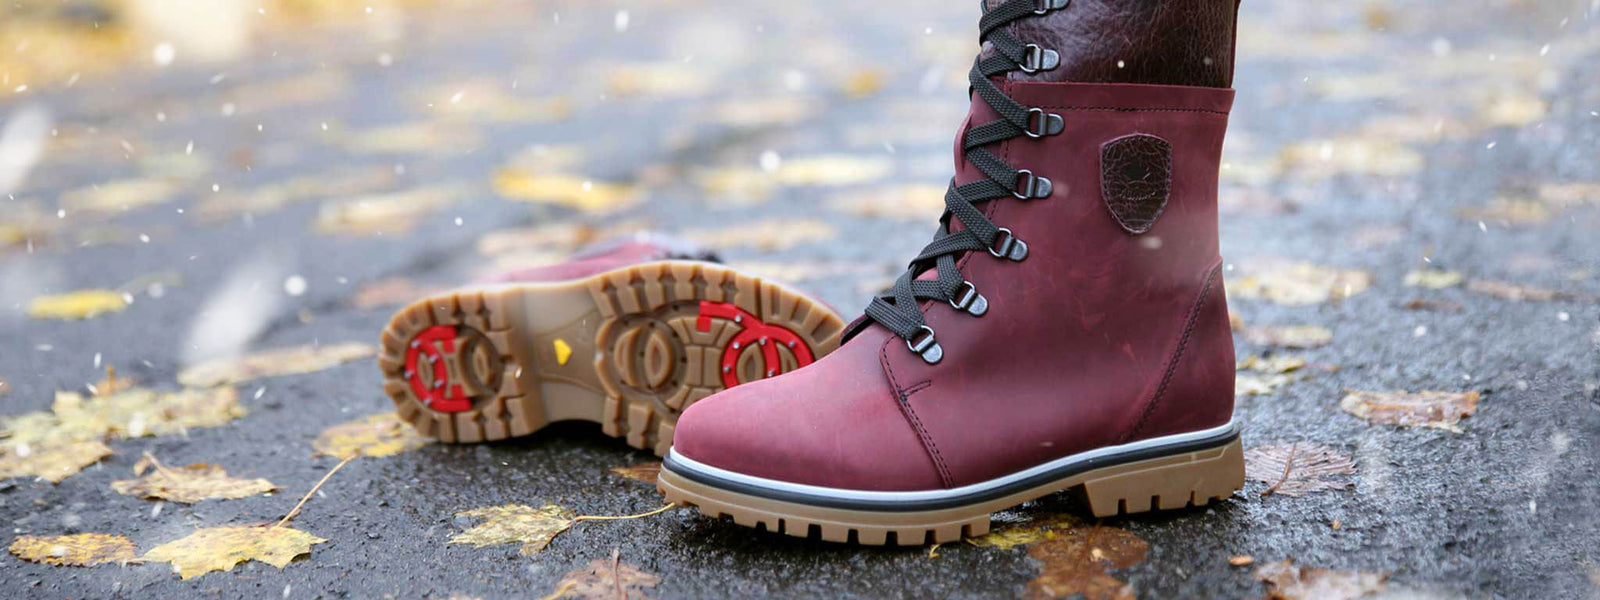 Winter boots for women